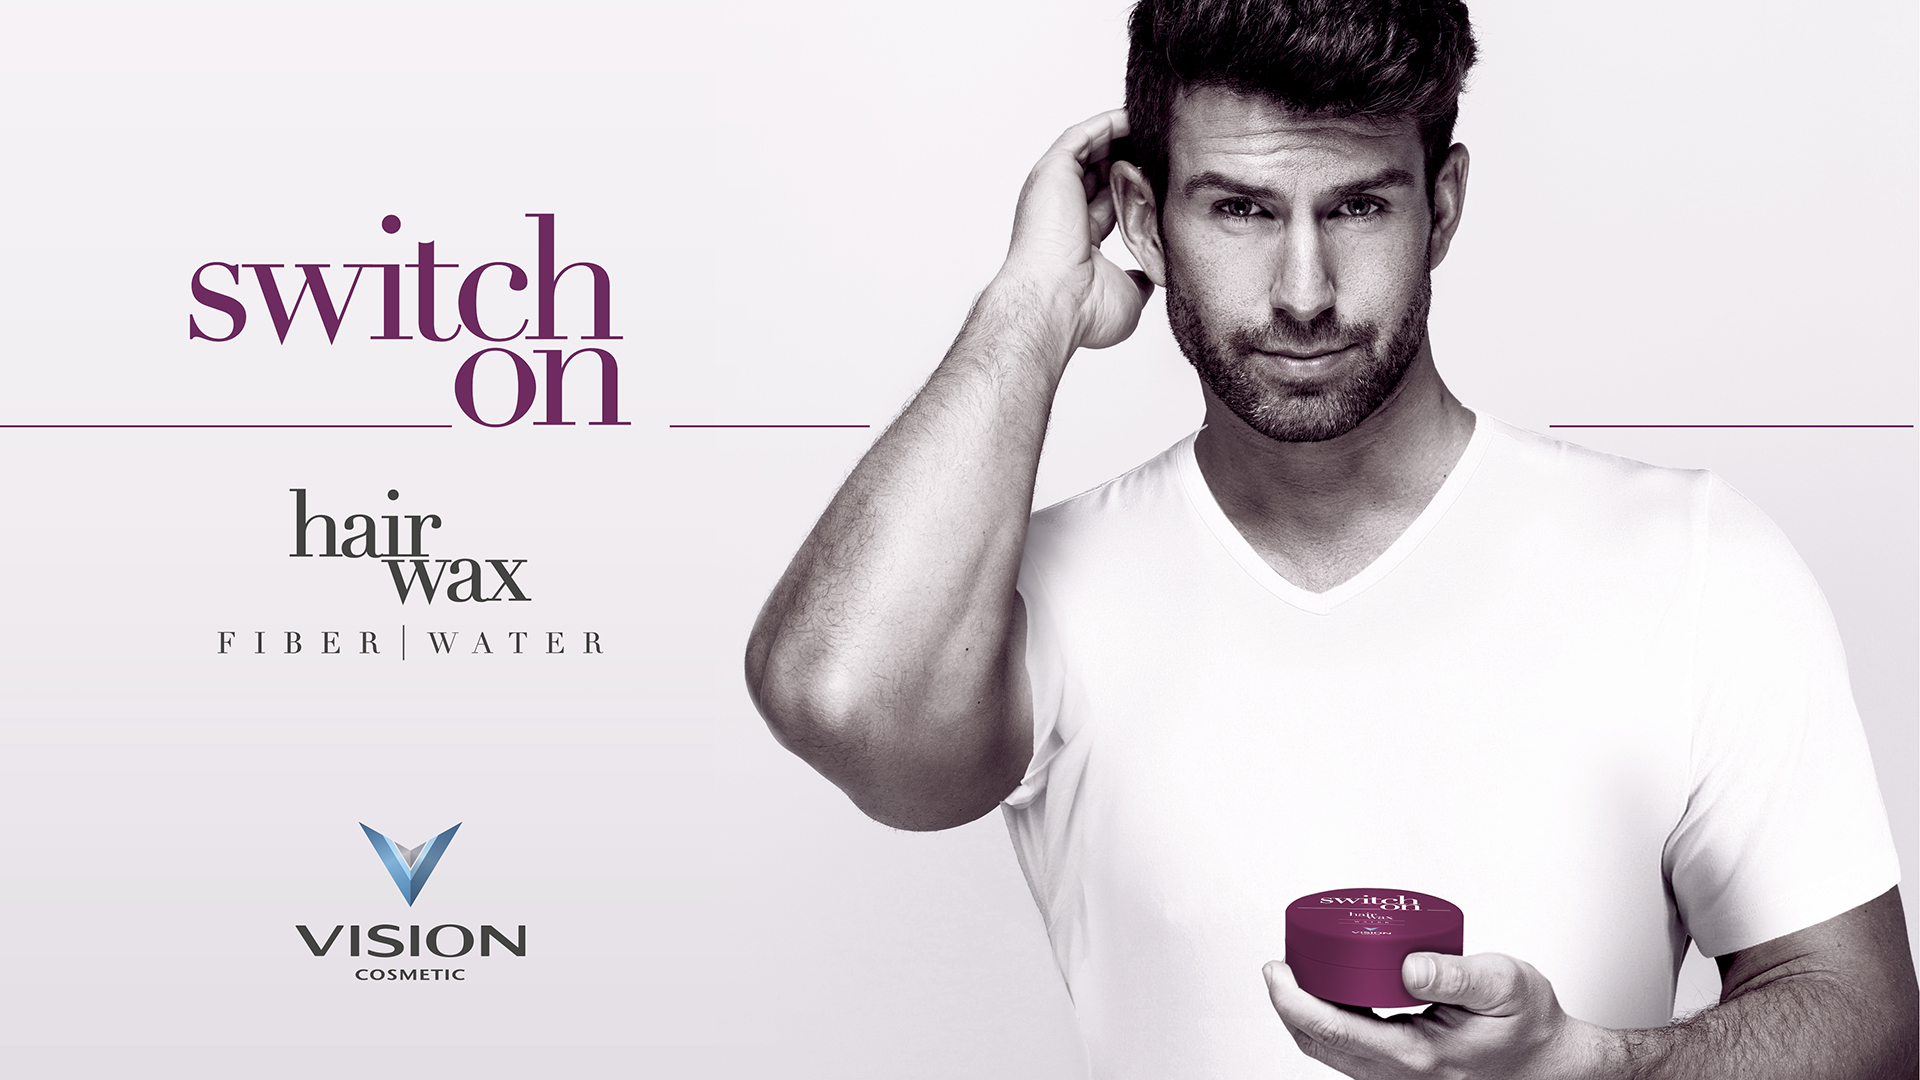 Switch on hair wax